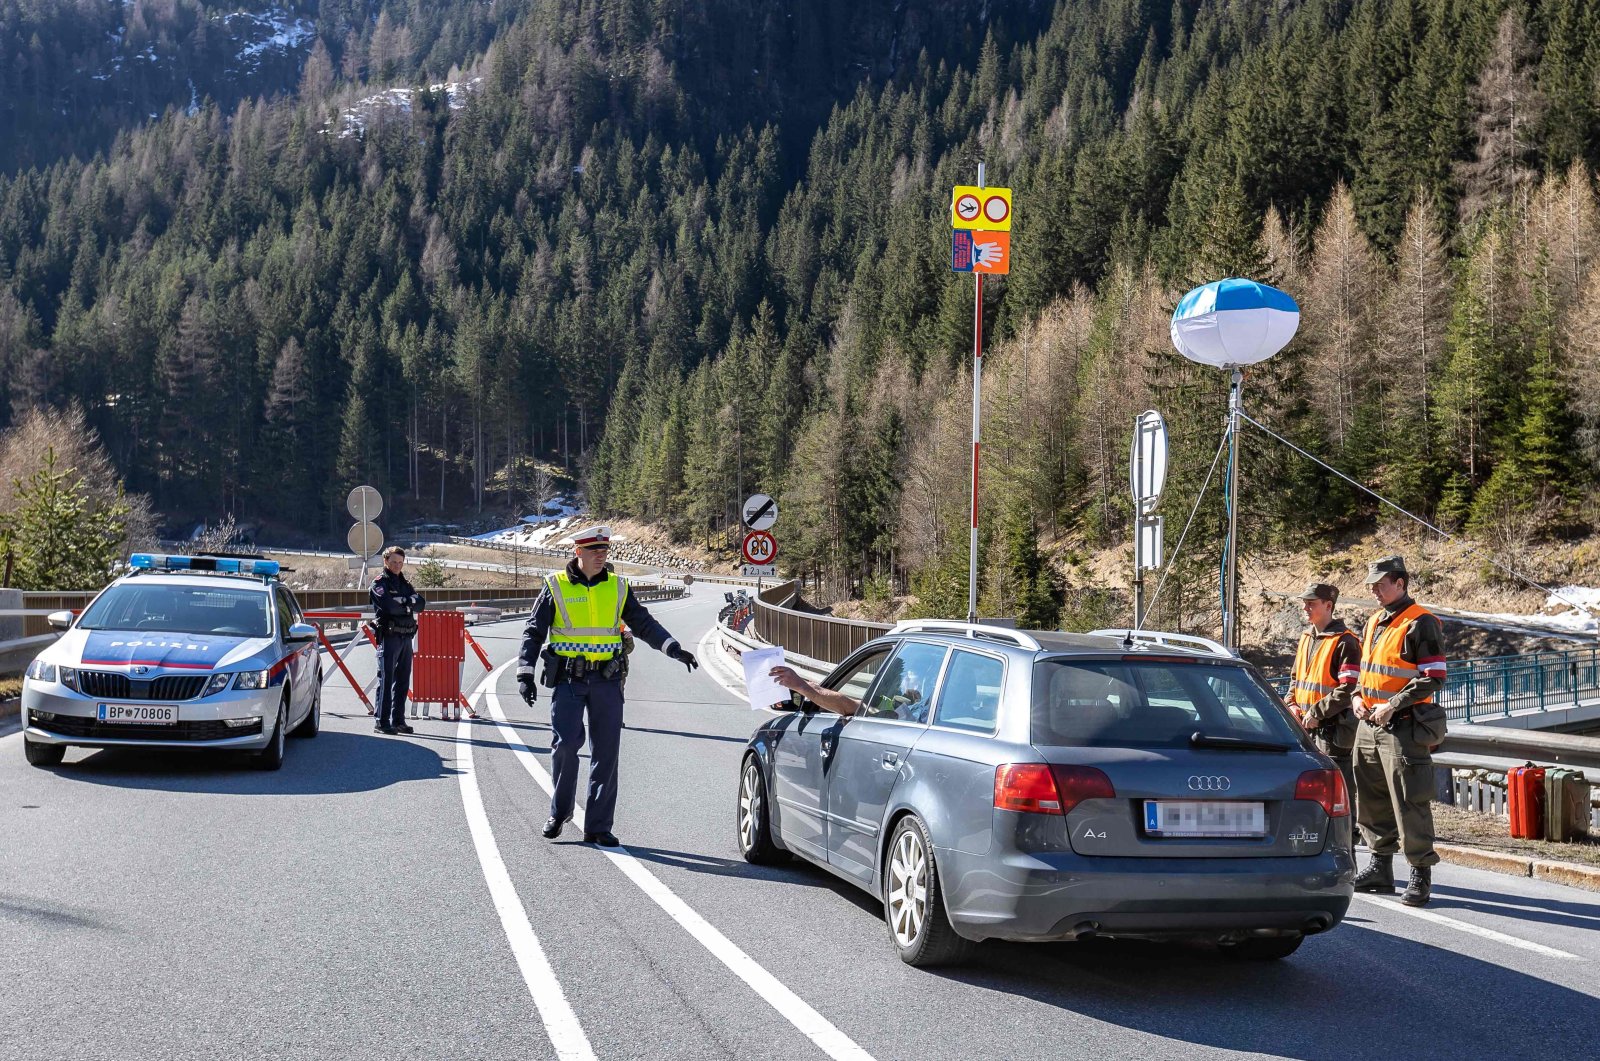 A driver presents documents to an Austrian policeman, March 2020 in Soelden, where people were filtered after the Tyrol town was quarantined due to the novel coronavirus epidemic. (AFP File Photo)